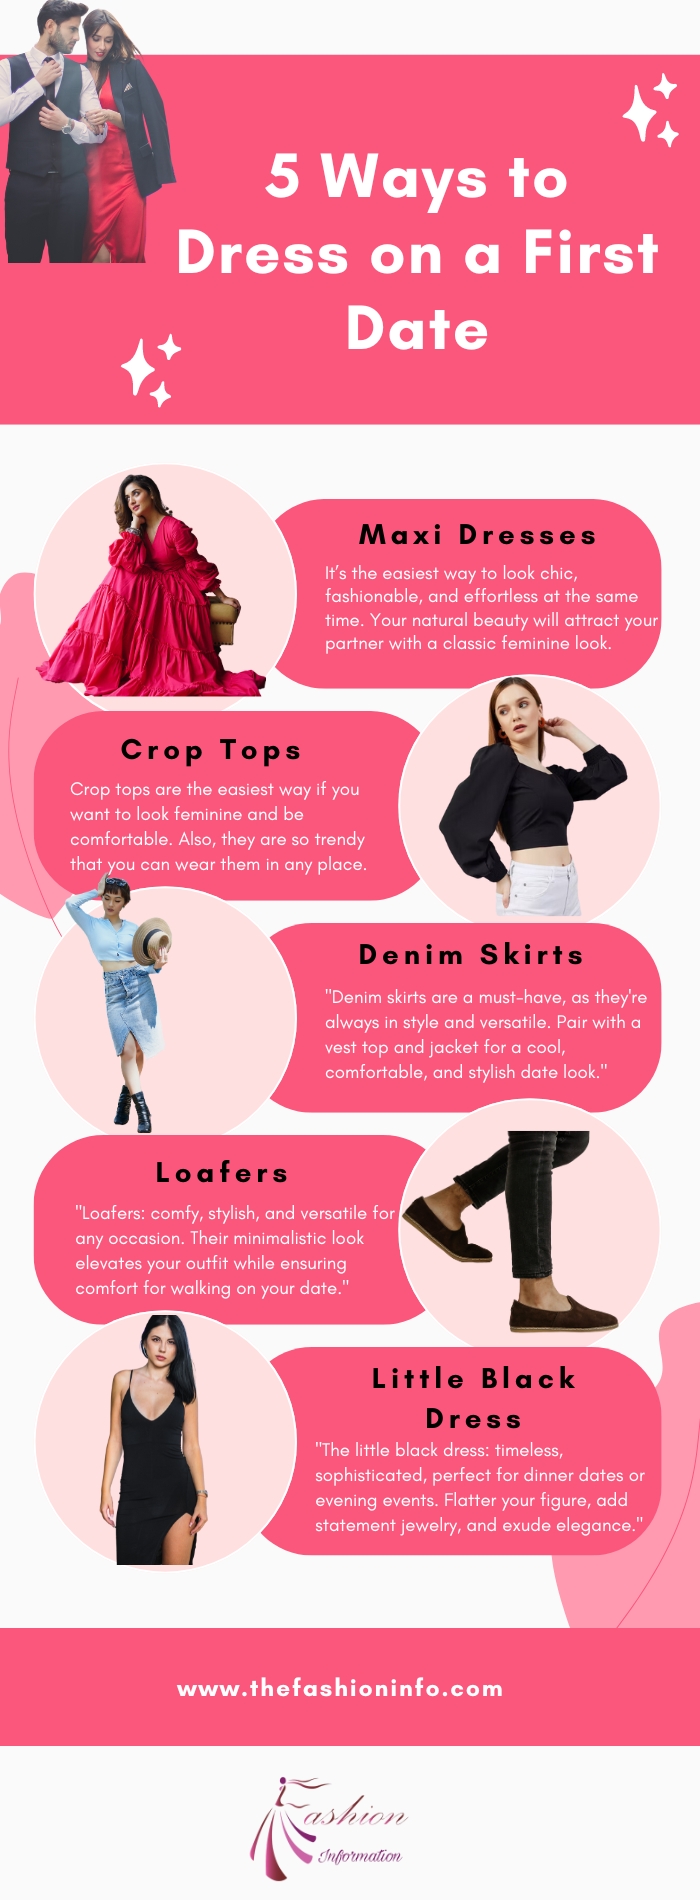 5 Ways to Dress on a First Date